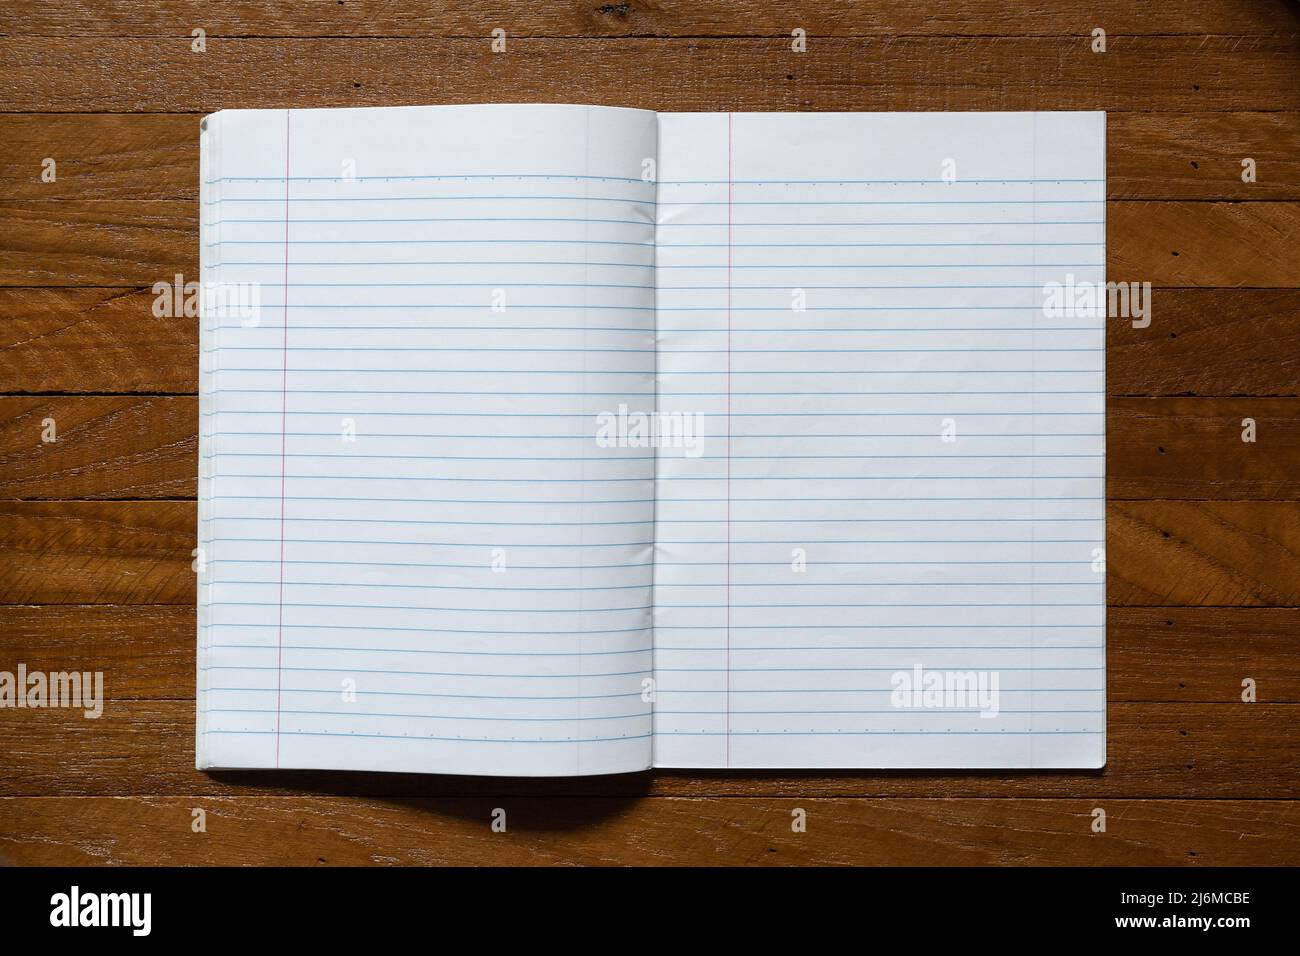 Ruled paper notebook on wooden table Stock Photo